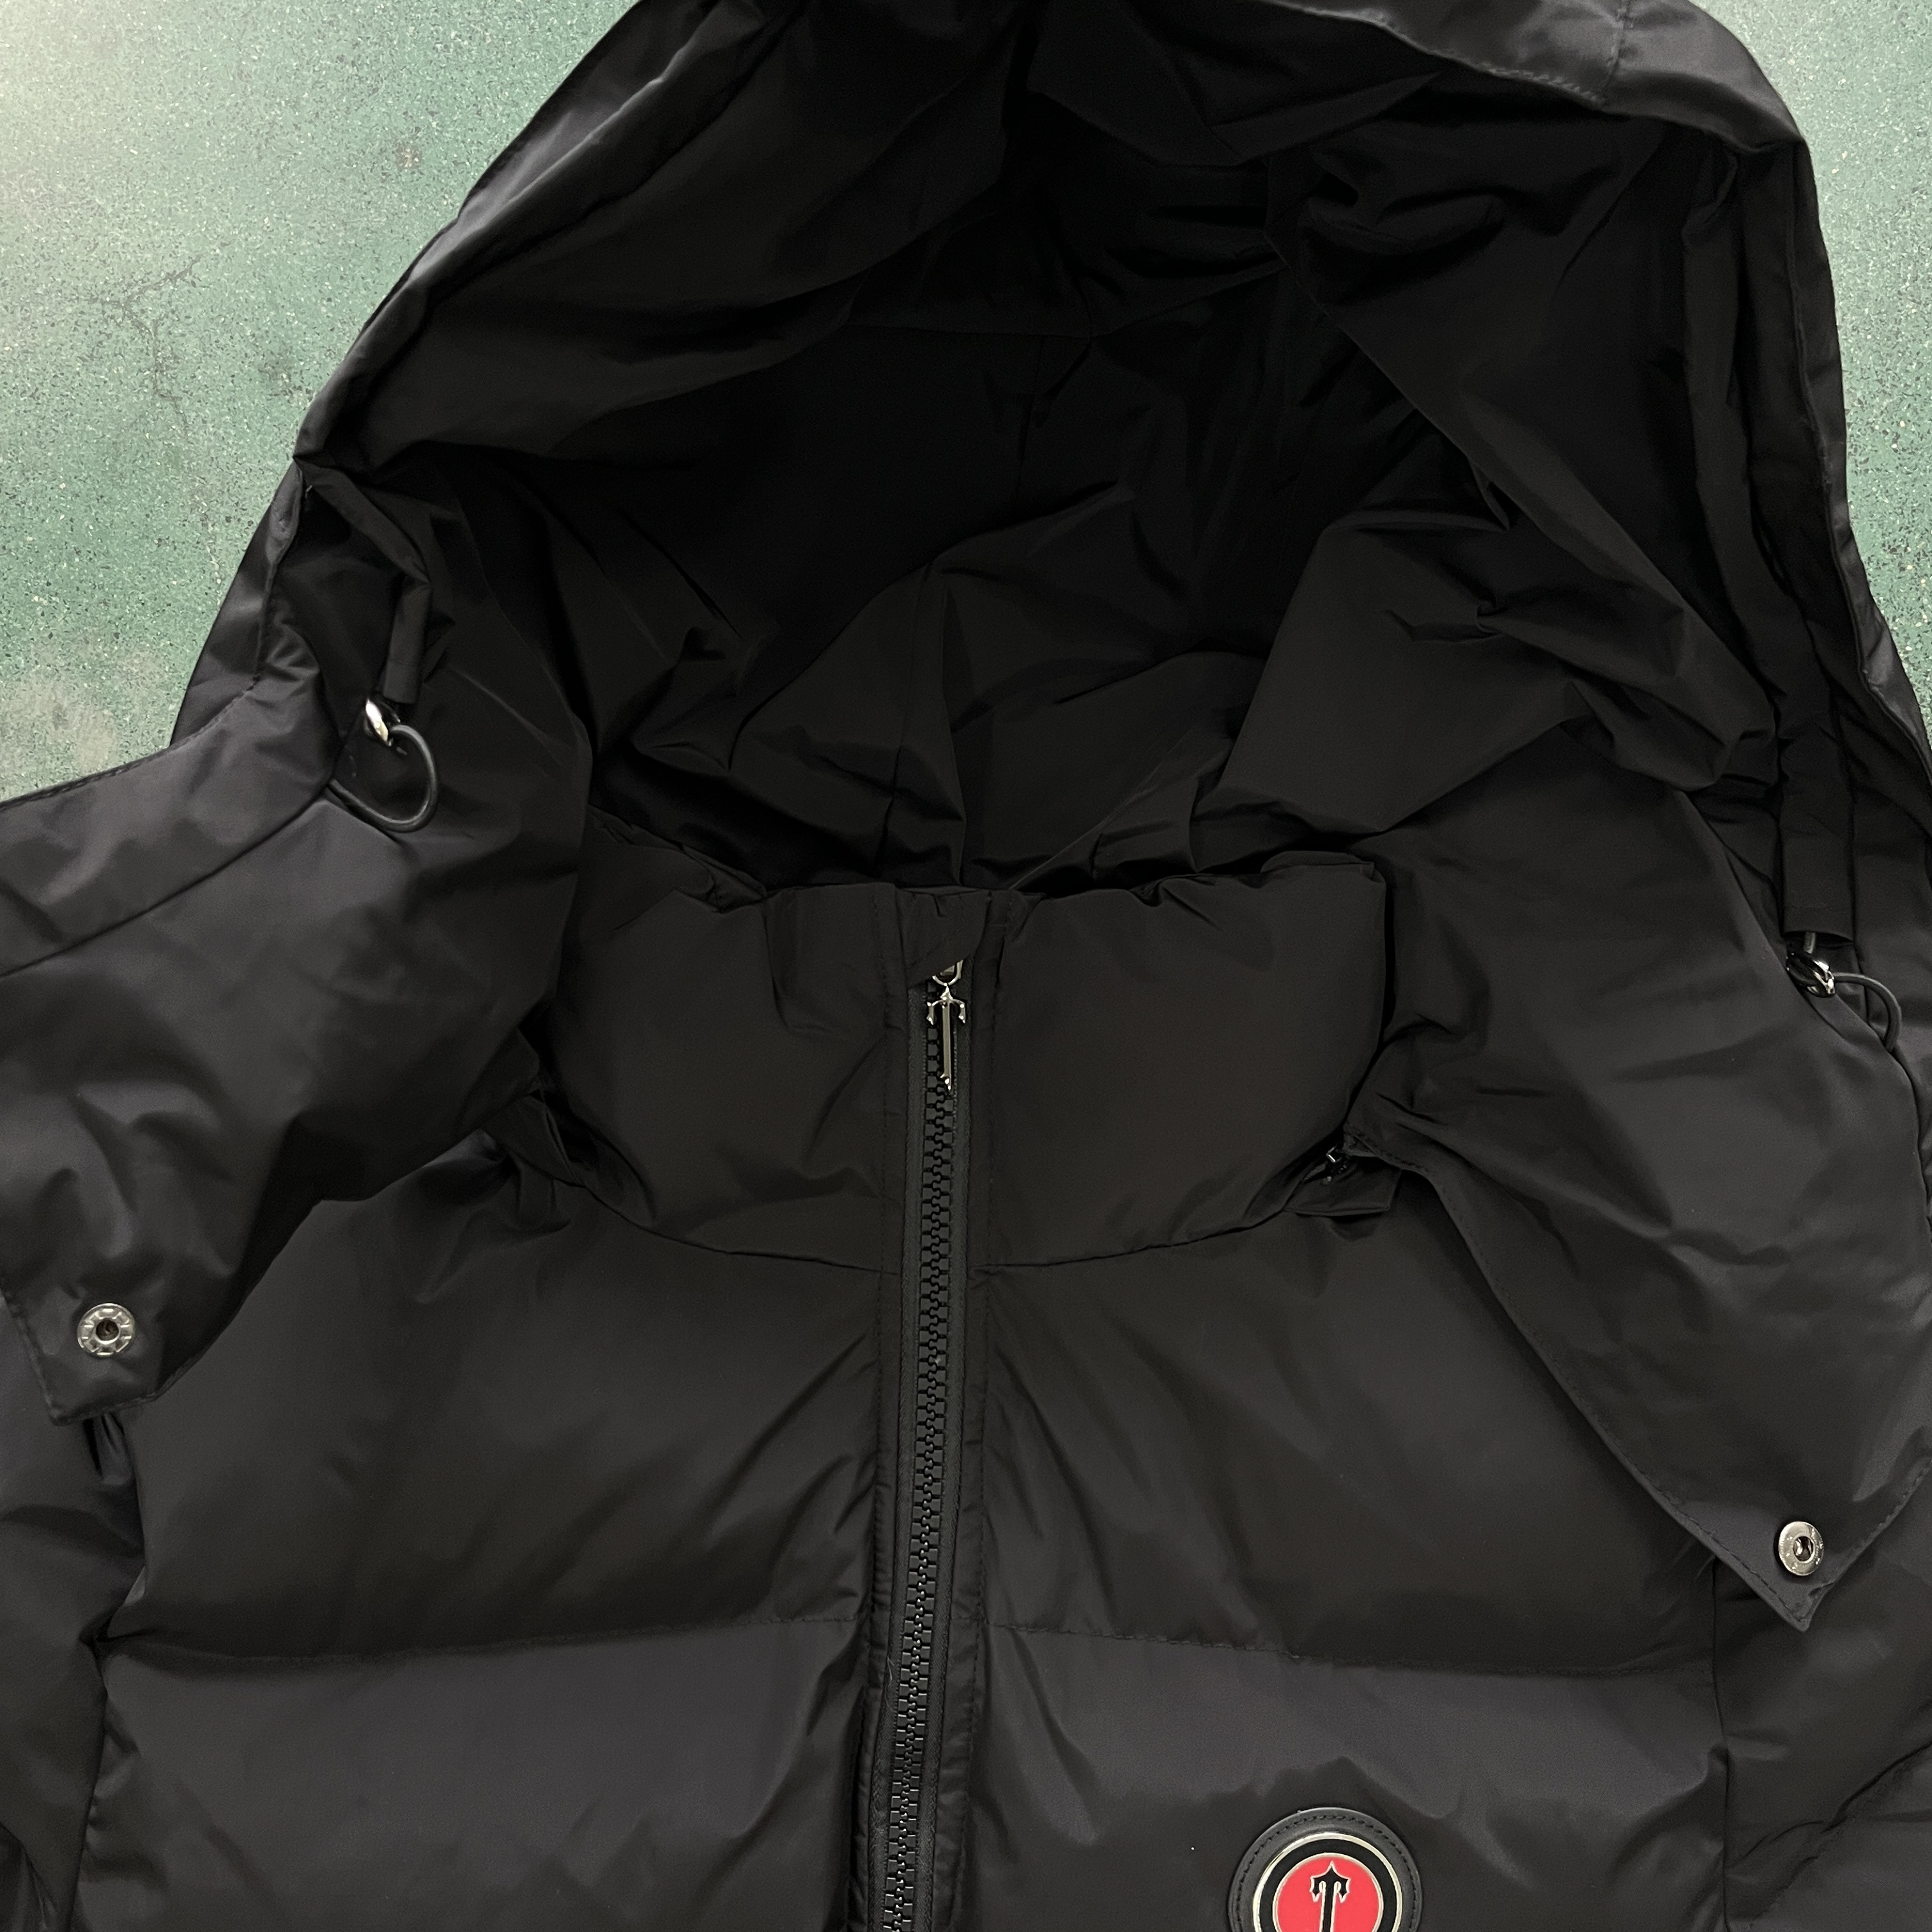 Master Style and Feel Powerful with the Irongate Puffer Jacket